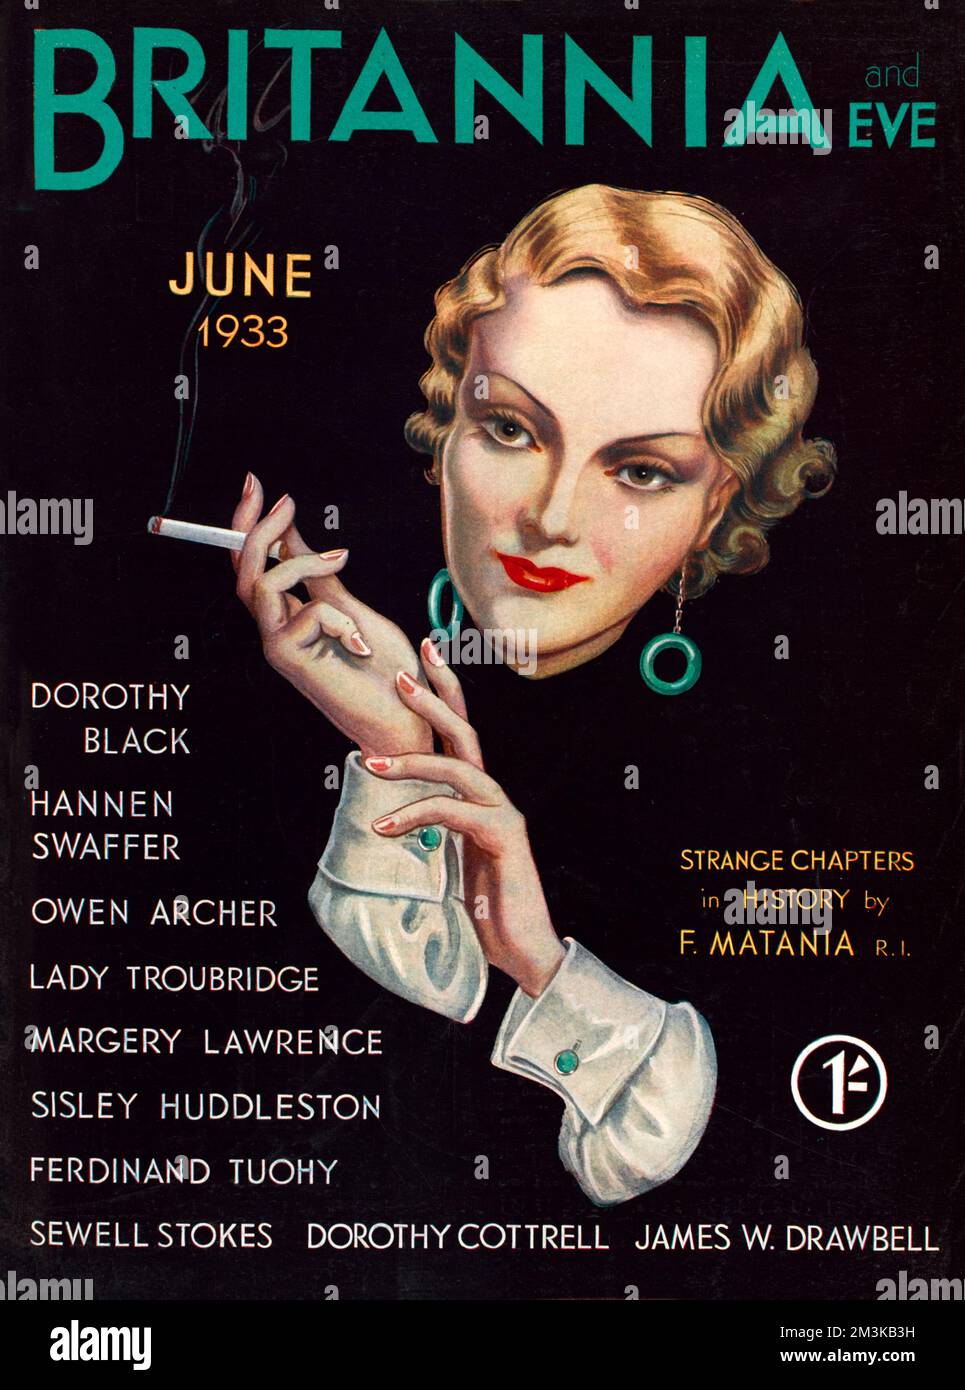 Front cover illustration featuring a sophisticated looking woman holding a cigarette in her elegant hands.     Date: June 1933 Stock Photo